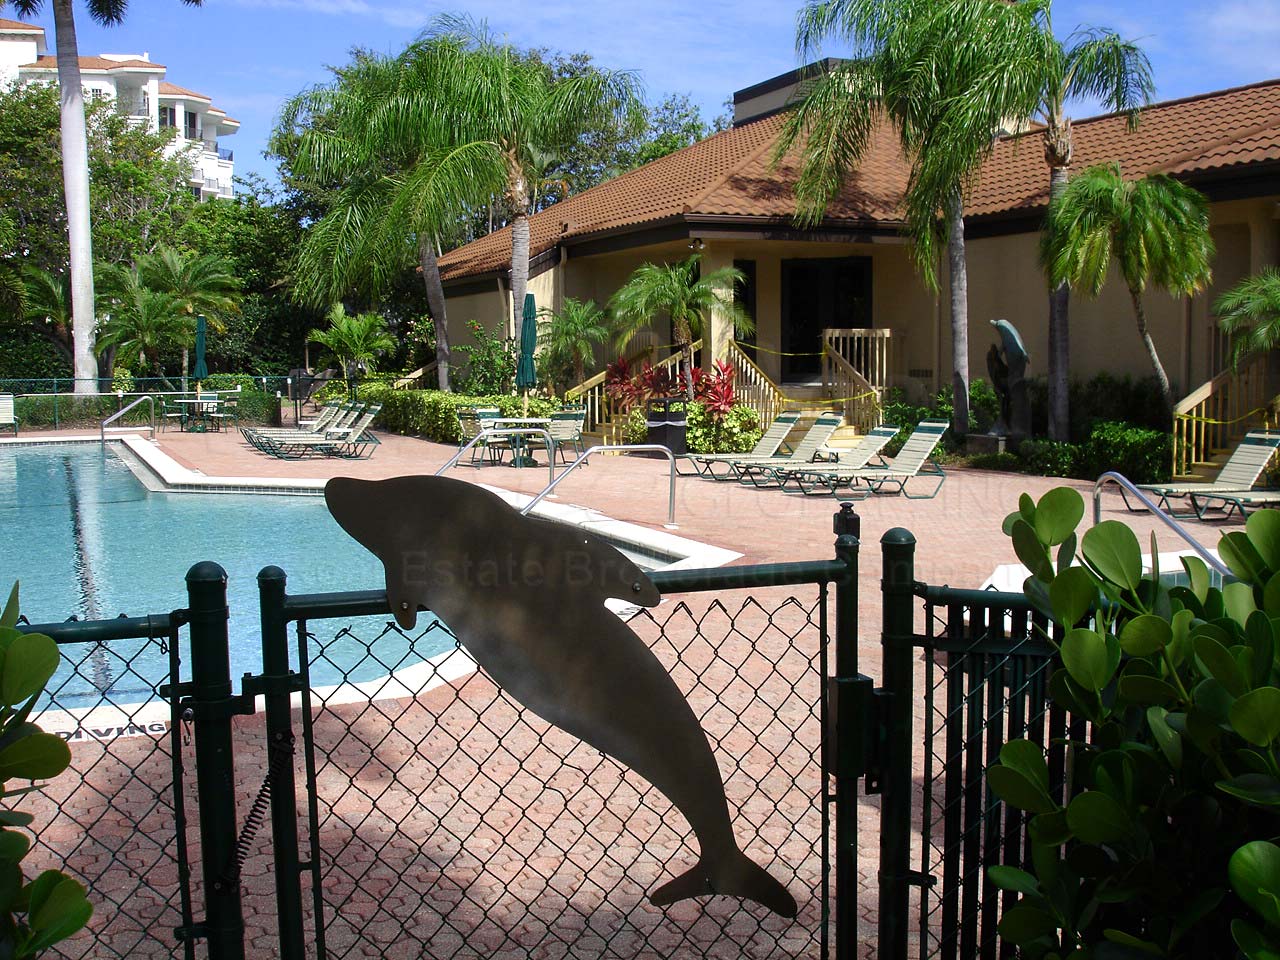 Twin Dolphins Shared Gate to Community Pool with La Peninsula